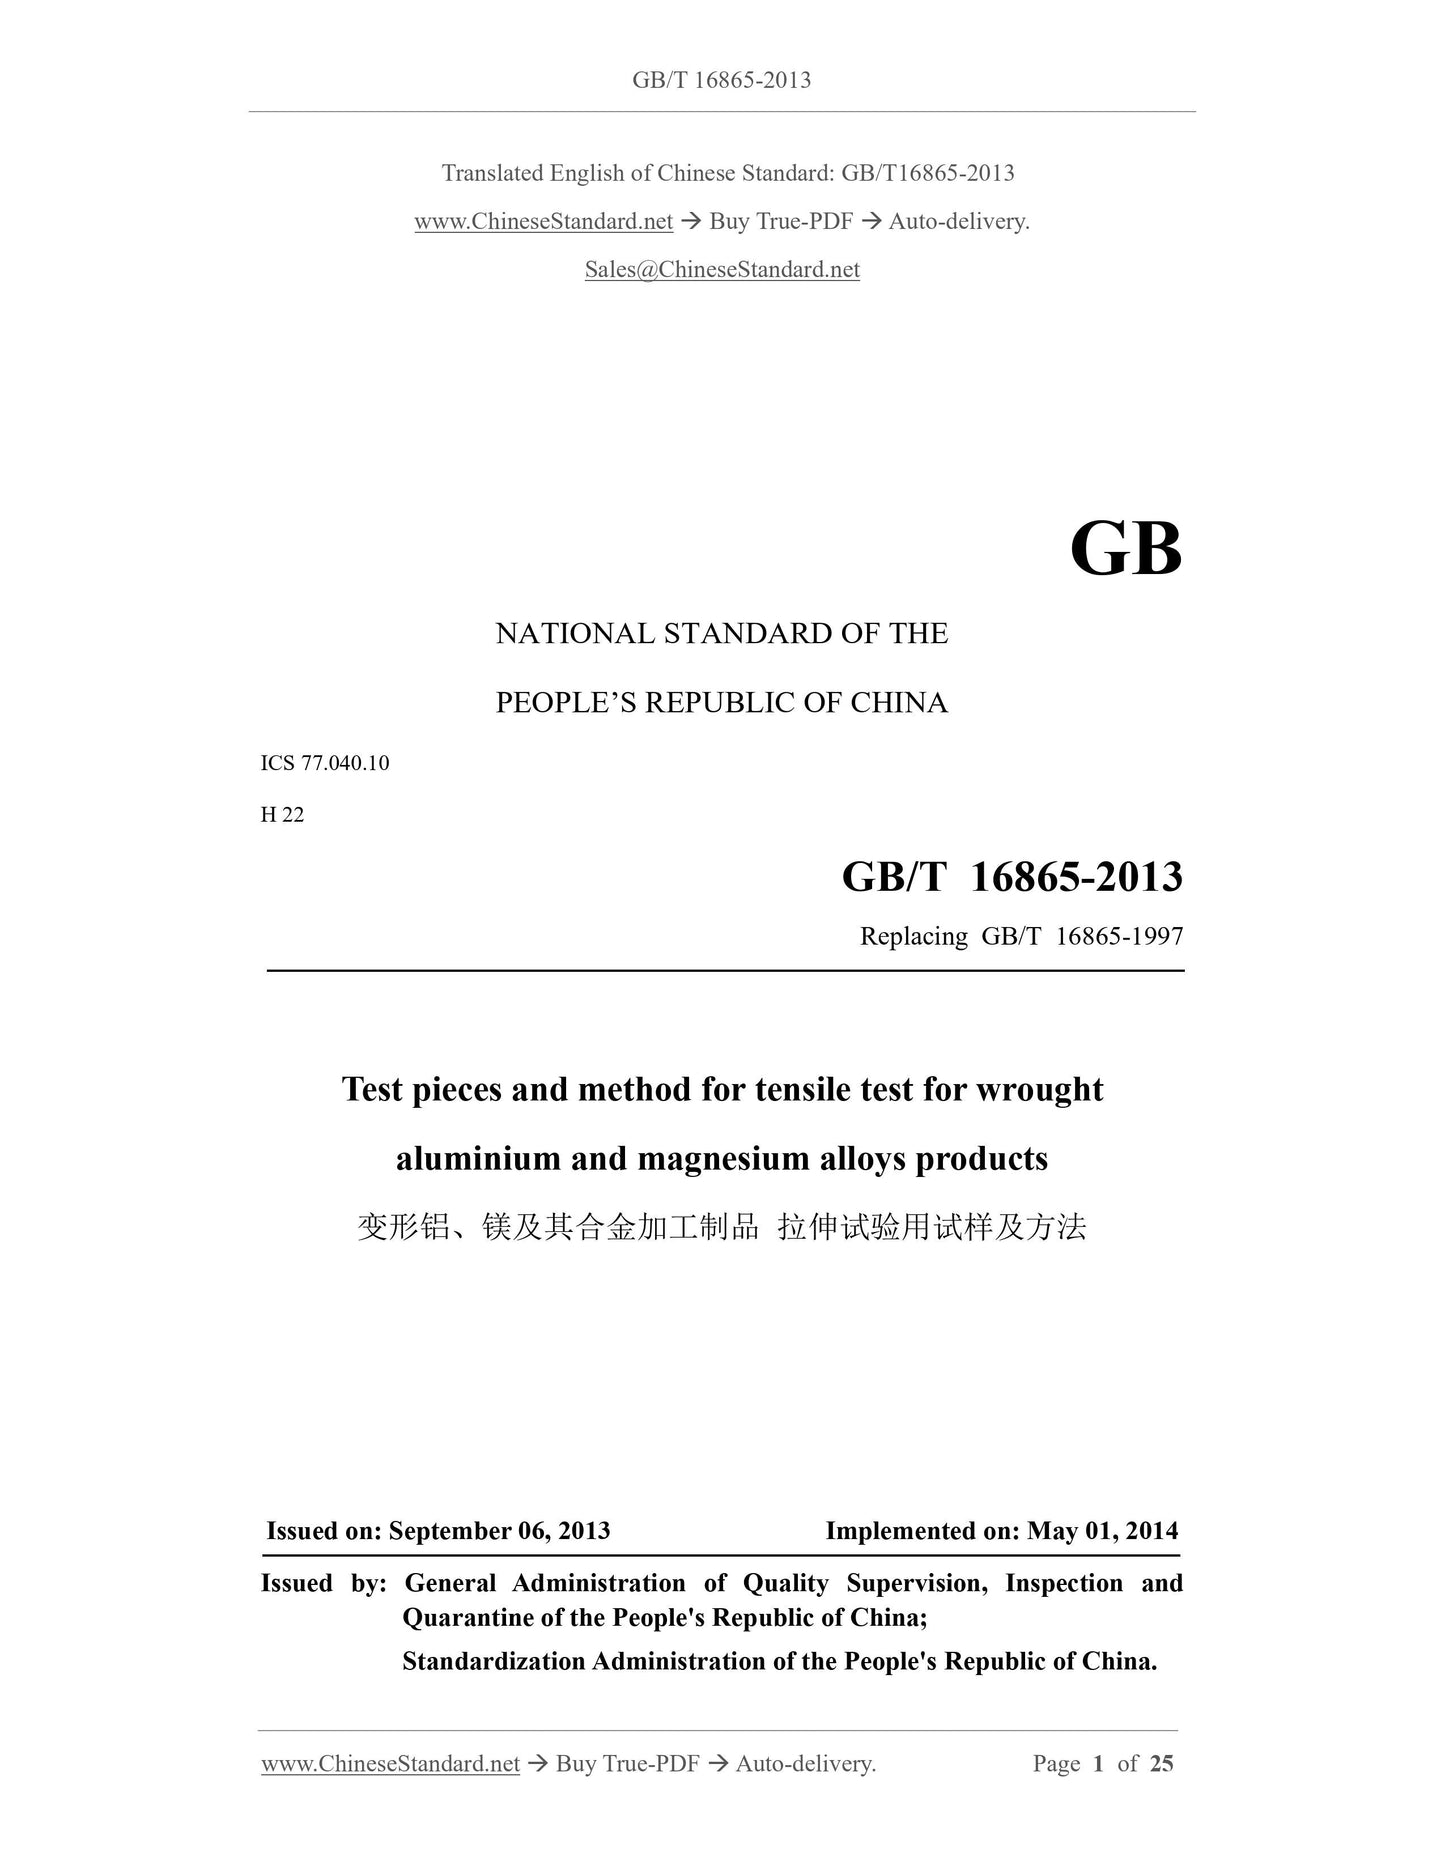 GB/T 16865-2013 Page 1